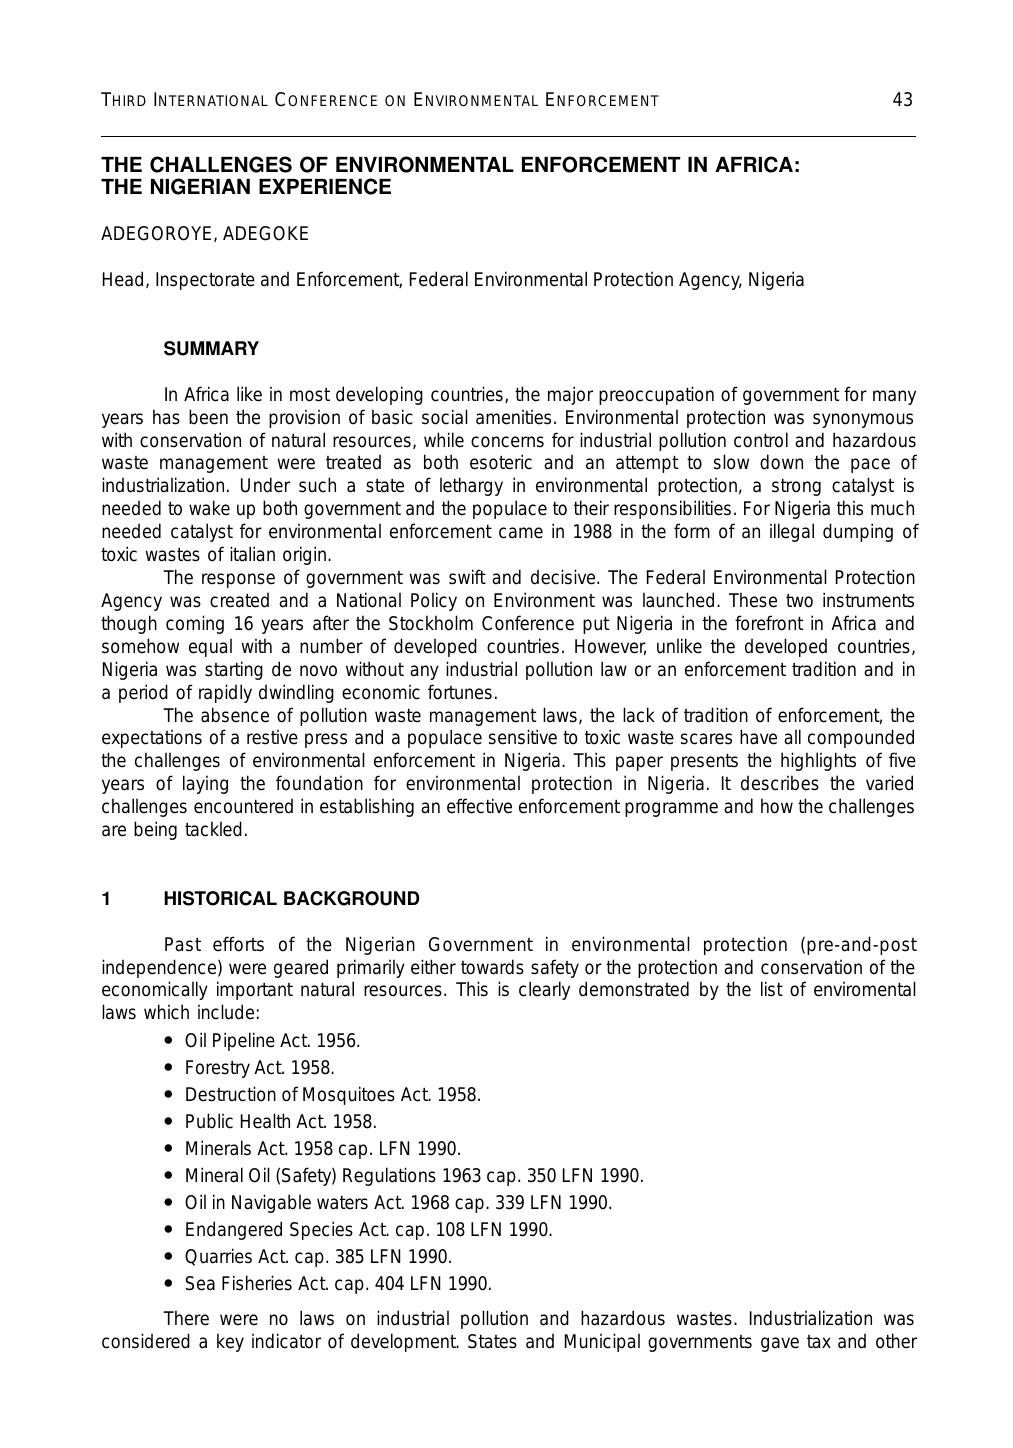 THE CHALLENGES OF ENVIRONMENTAL ENFORCEMENT IN AFRICA -THE NIGERIAN EXPERIENCE